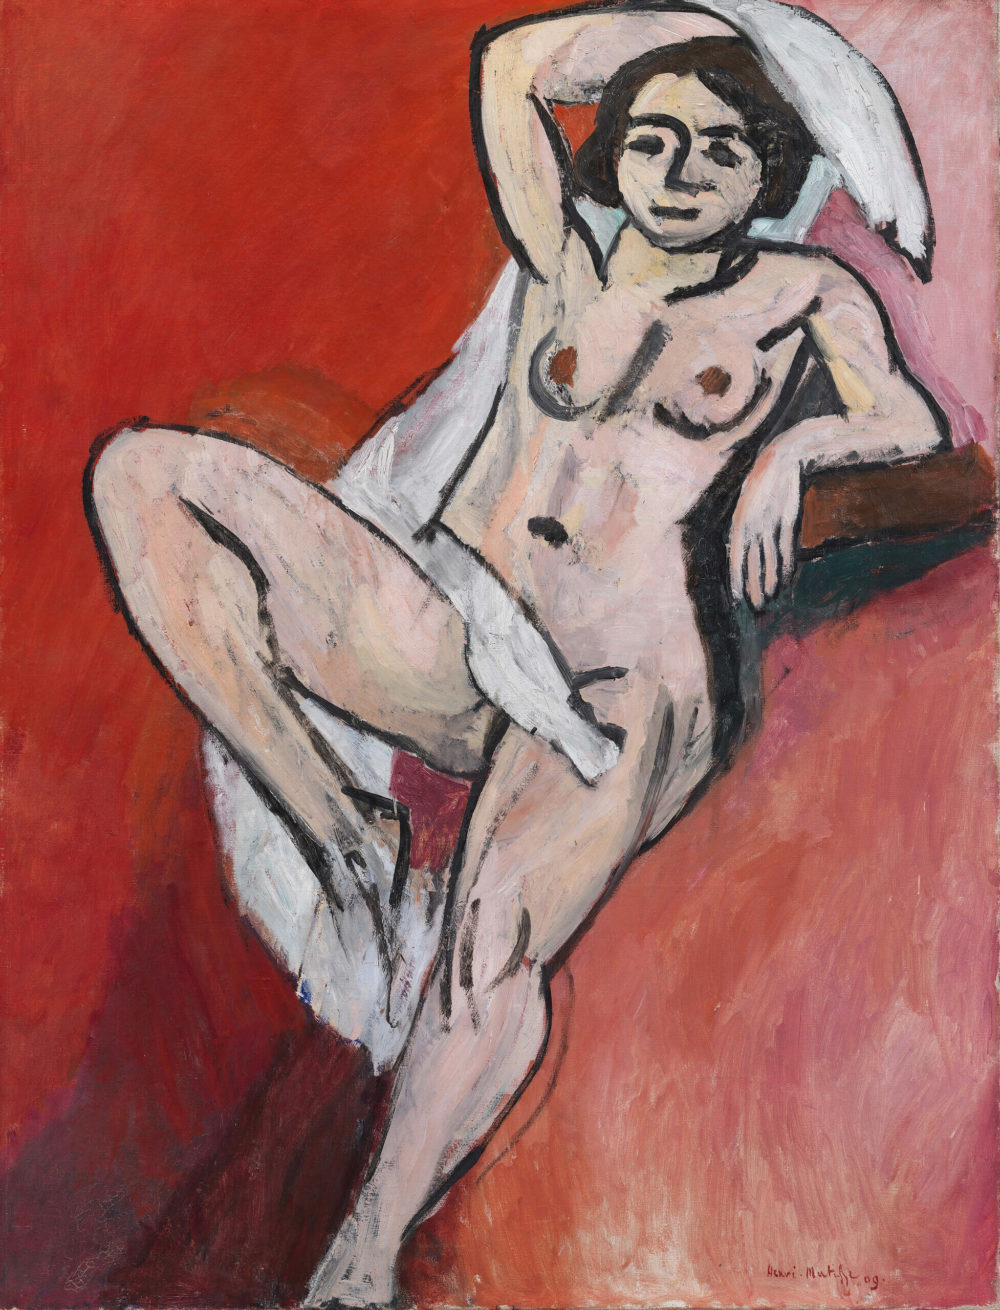 Henri Matisse, Nude with White Scarf, 1909, Oil on canvas, 116.5 x 89 cm, SMK, National Gallery of Denmark © Succession H. Matisse/VISDA 2022